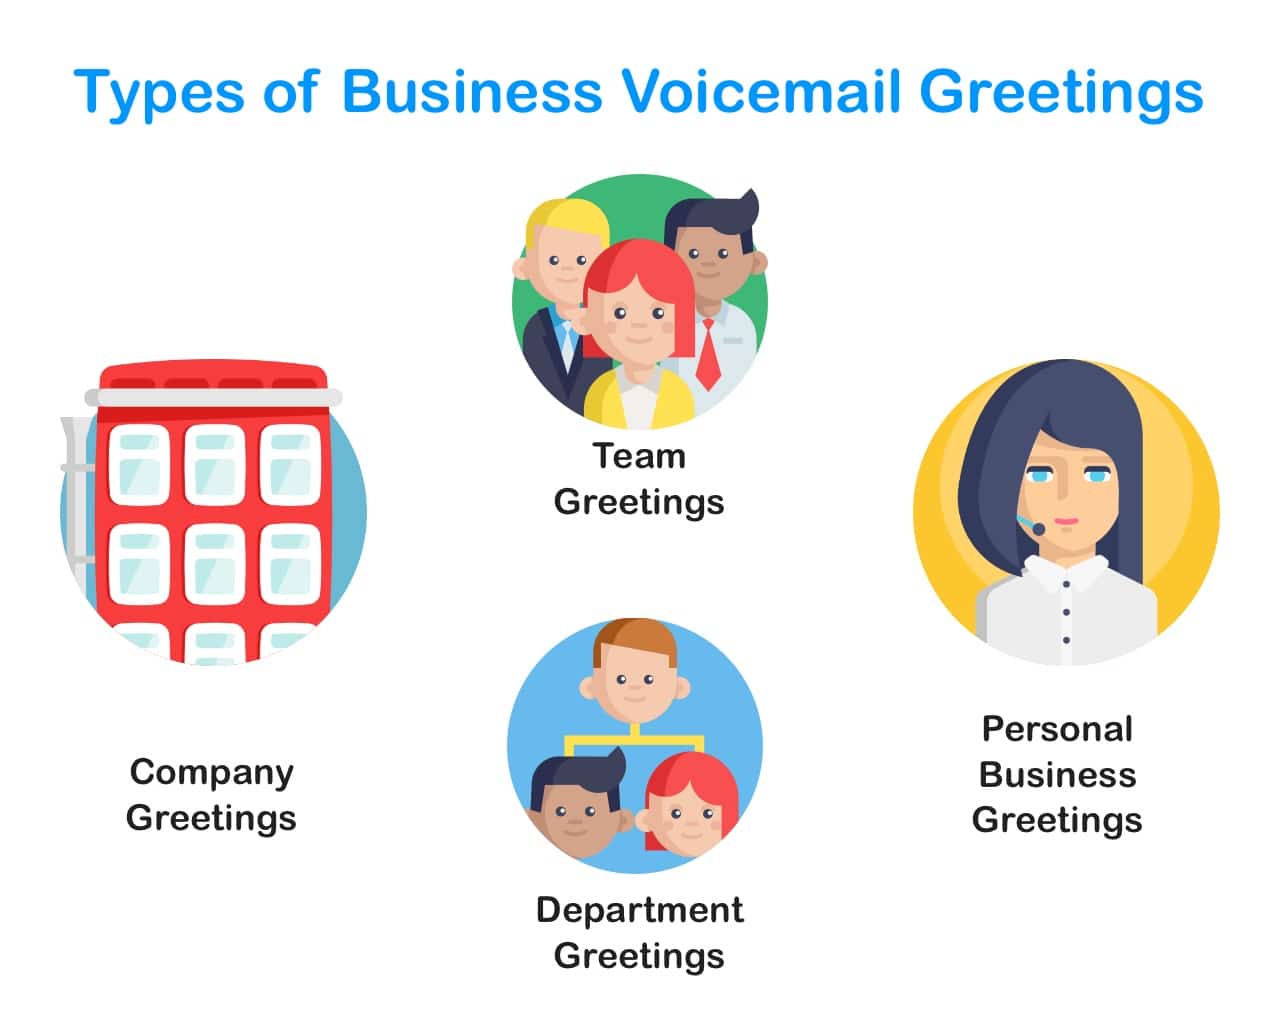 Types of Small Business Professional Voicemail Greetings